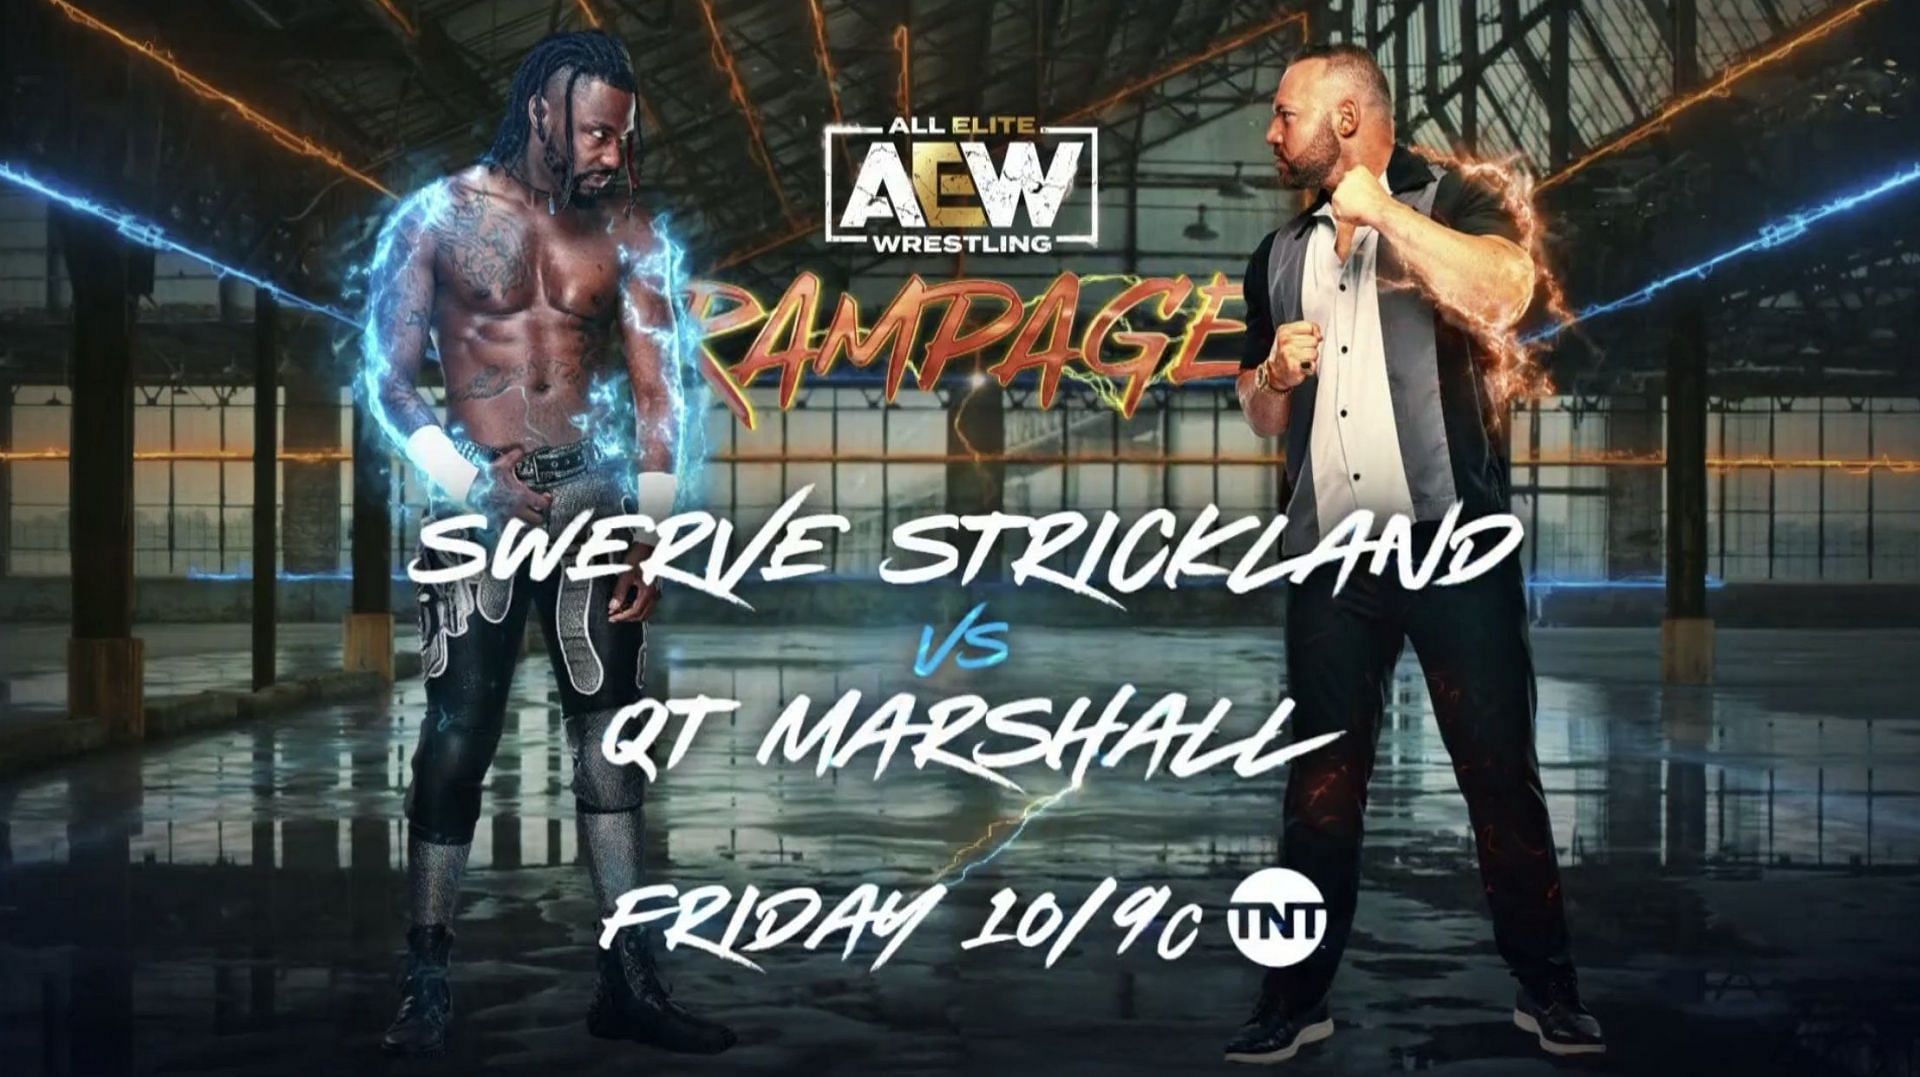 Marshall has openly been having problems with the new talent in AEW.